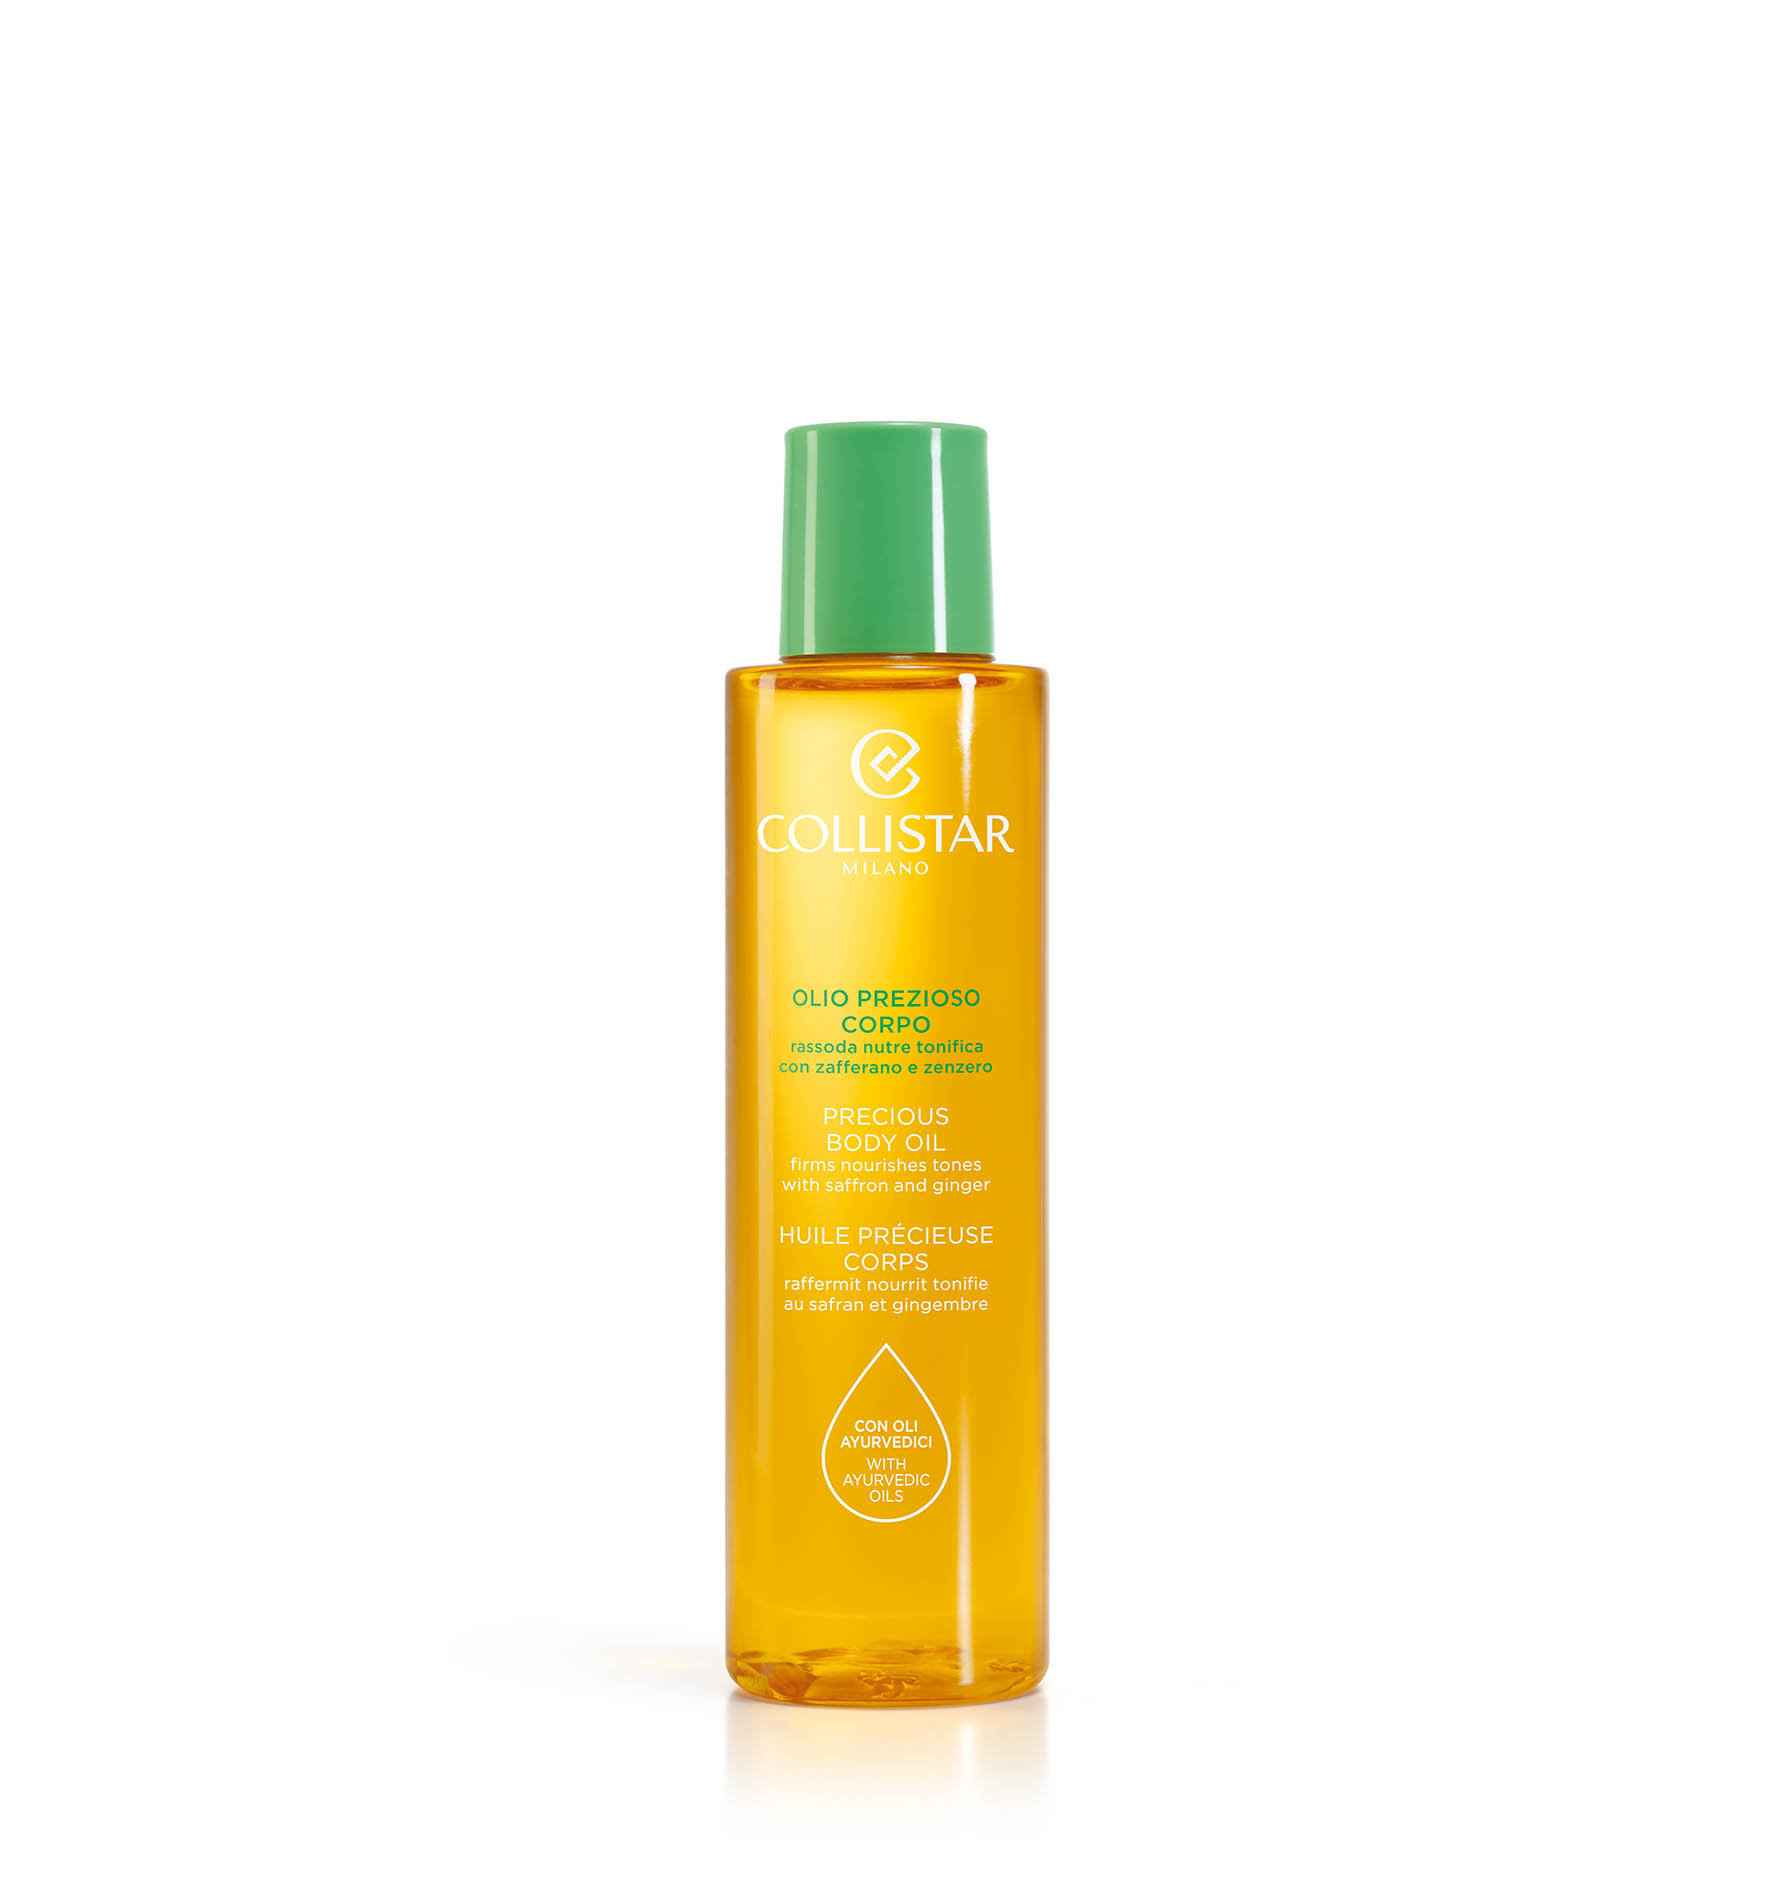 PRECIOUS BODY OIL - Relaxing body routine | Collistar - Shop Online Ufficiale